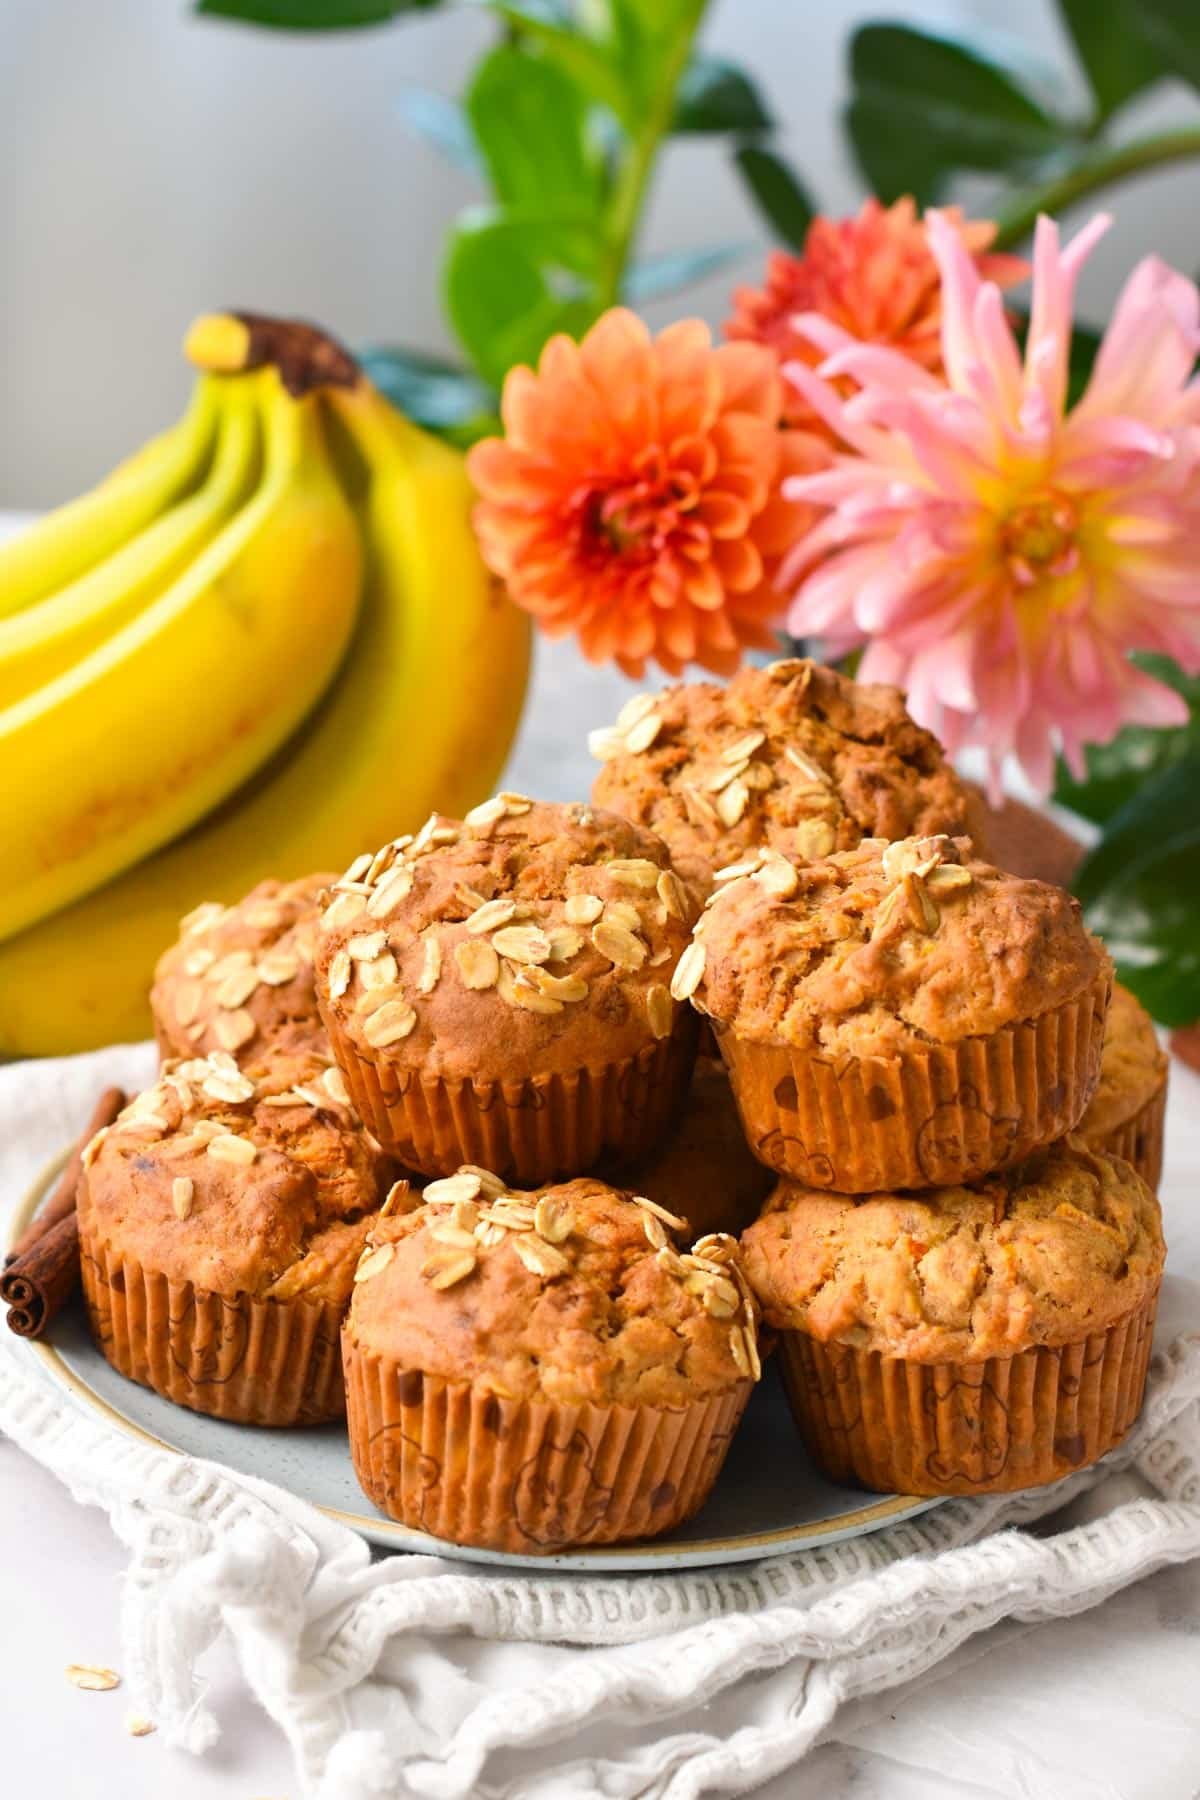 A plate filled with a stack of banana carrot muffins with oats on op and banana and orange flowers in the background